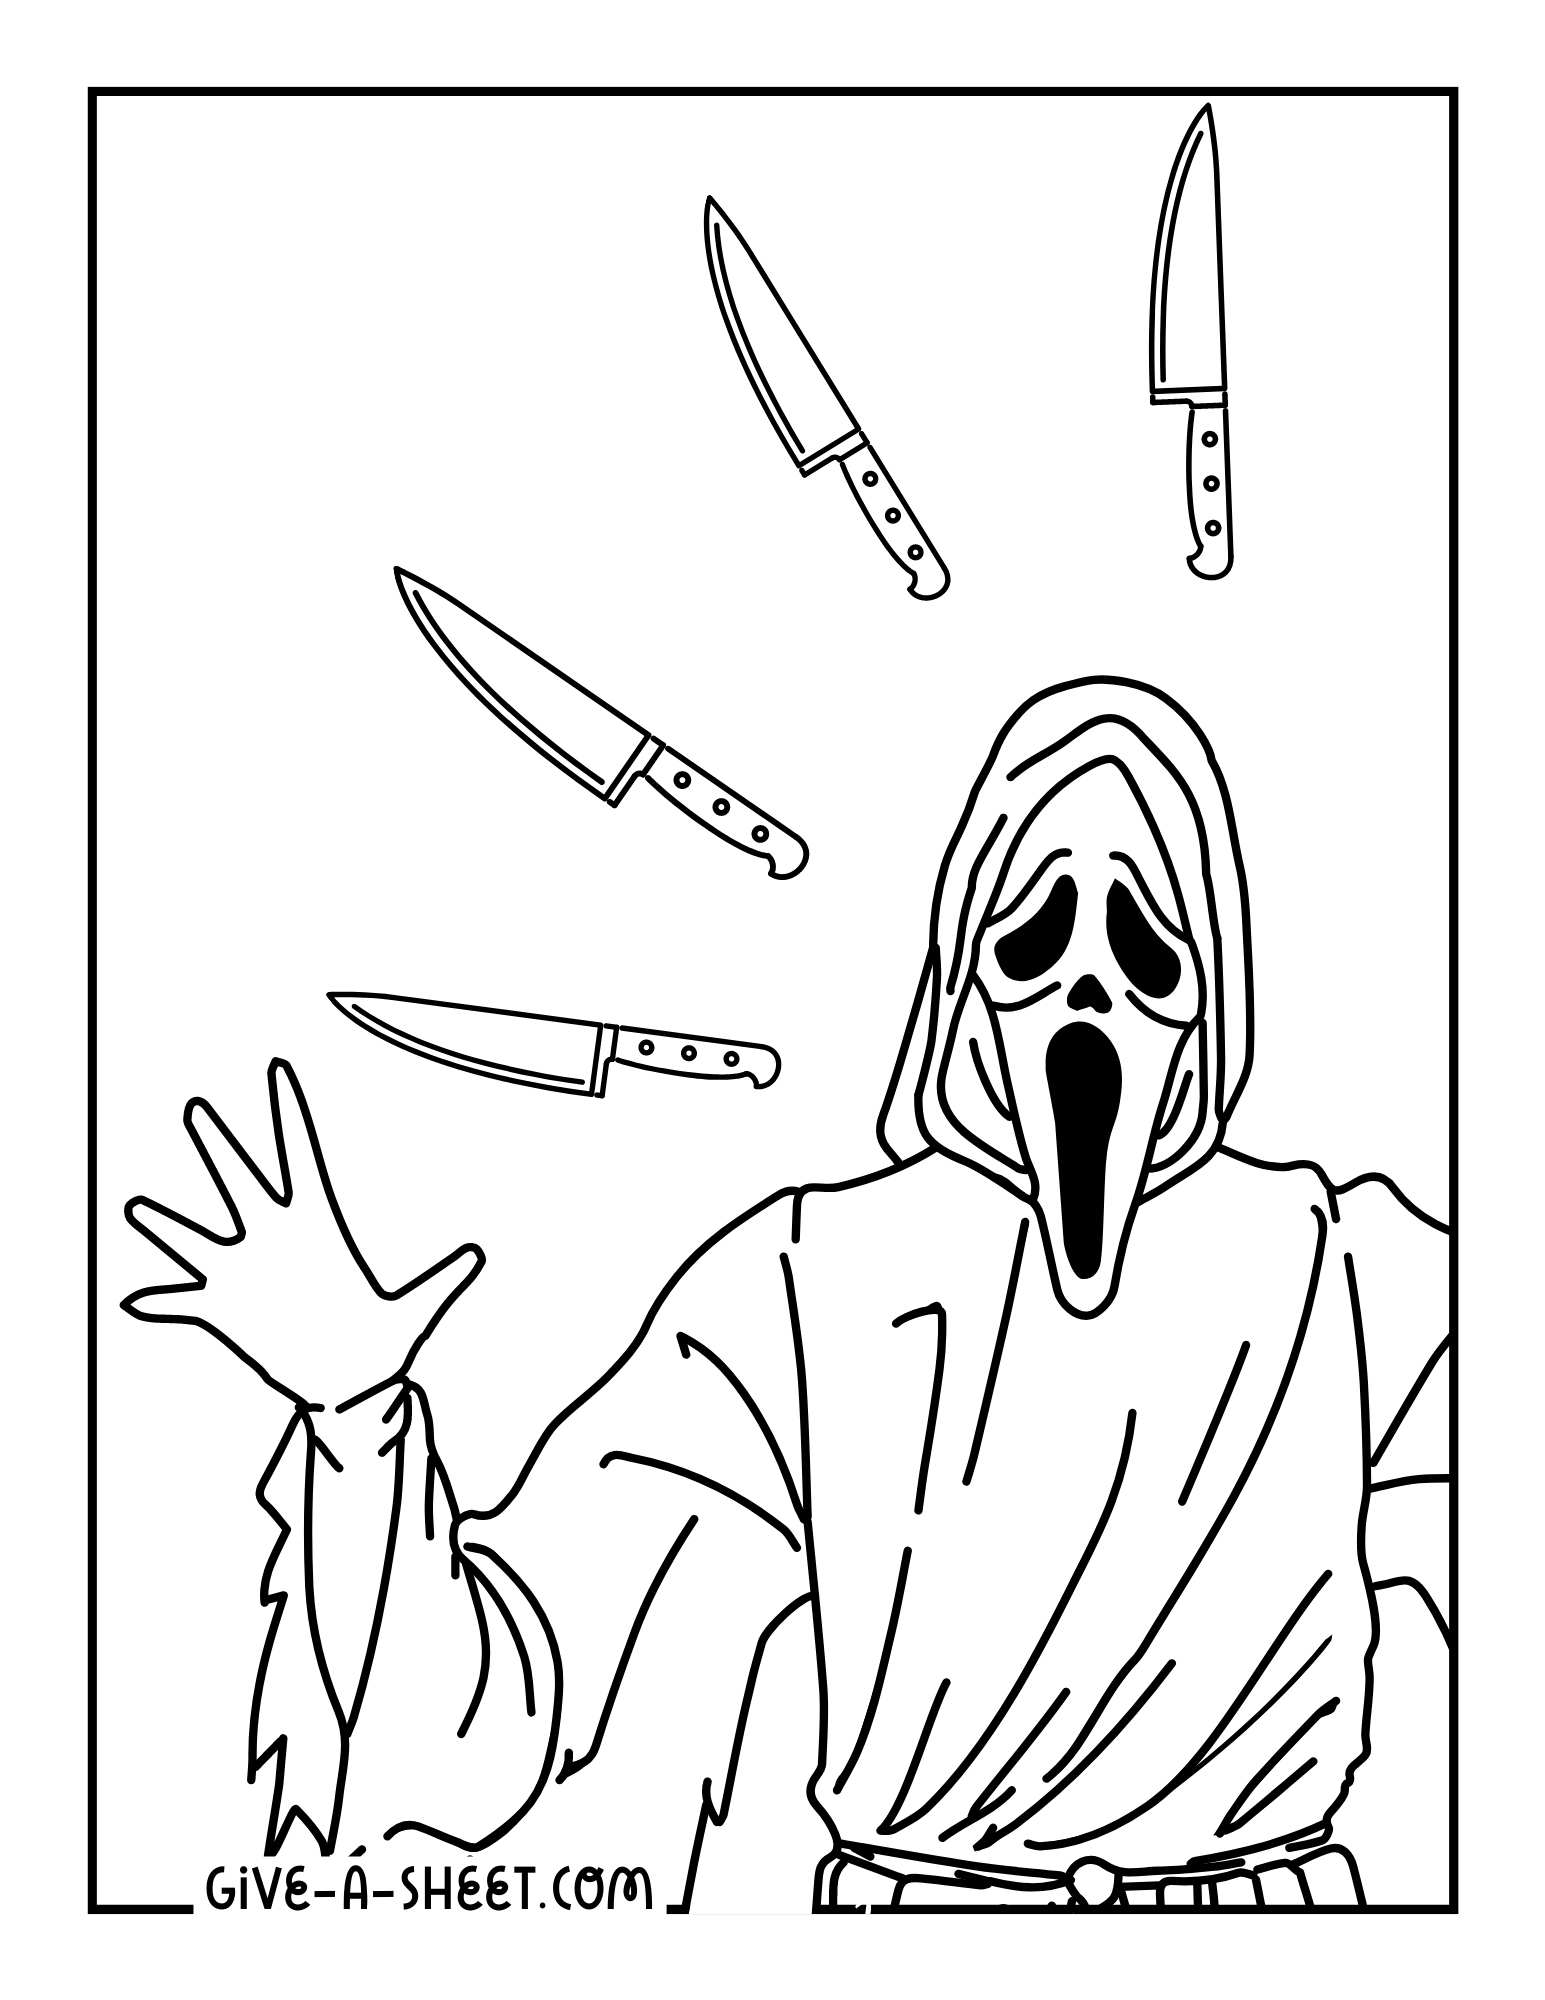 Billy Loomis ghostface scary movies coloring sheet.